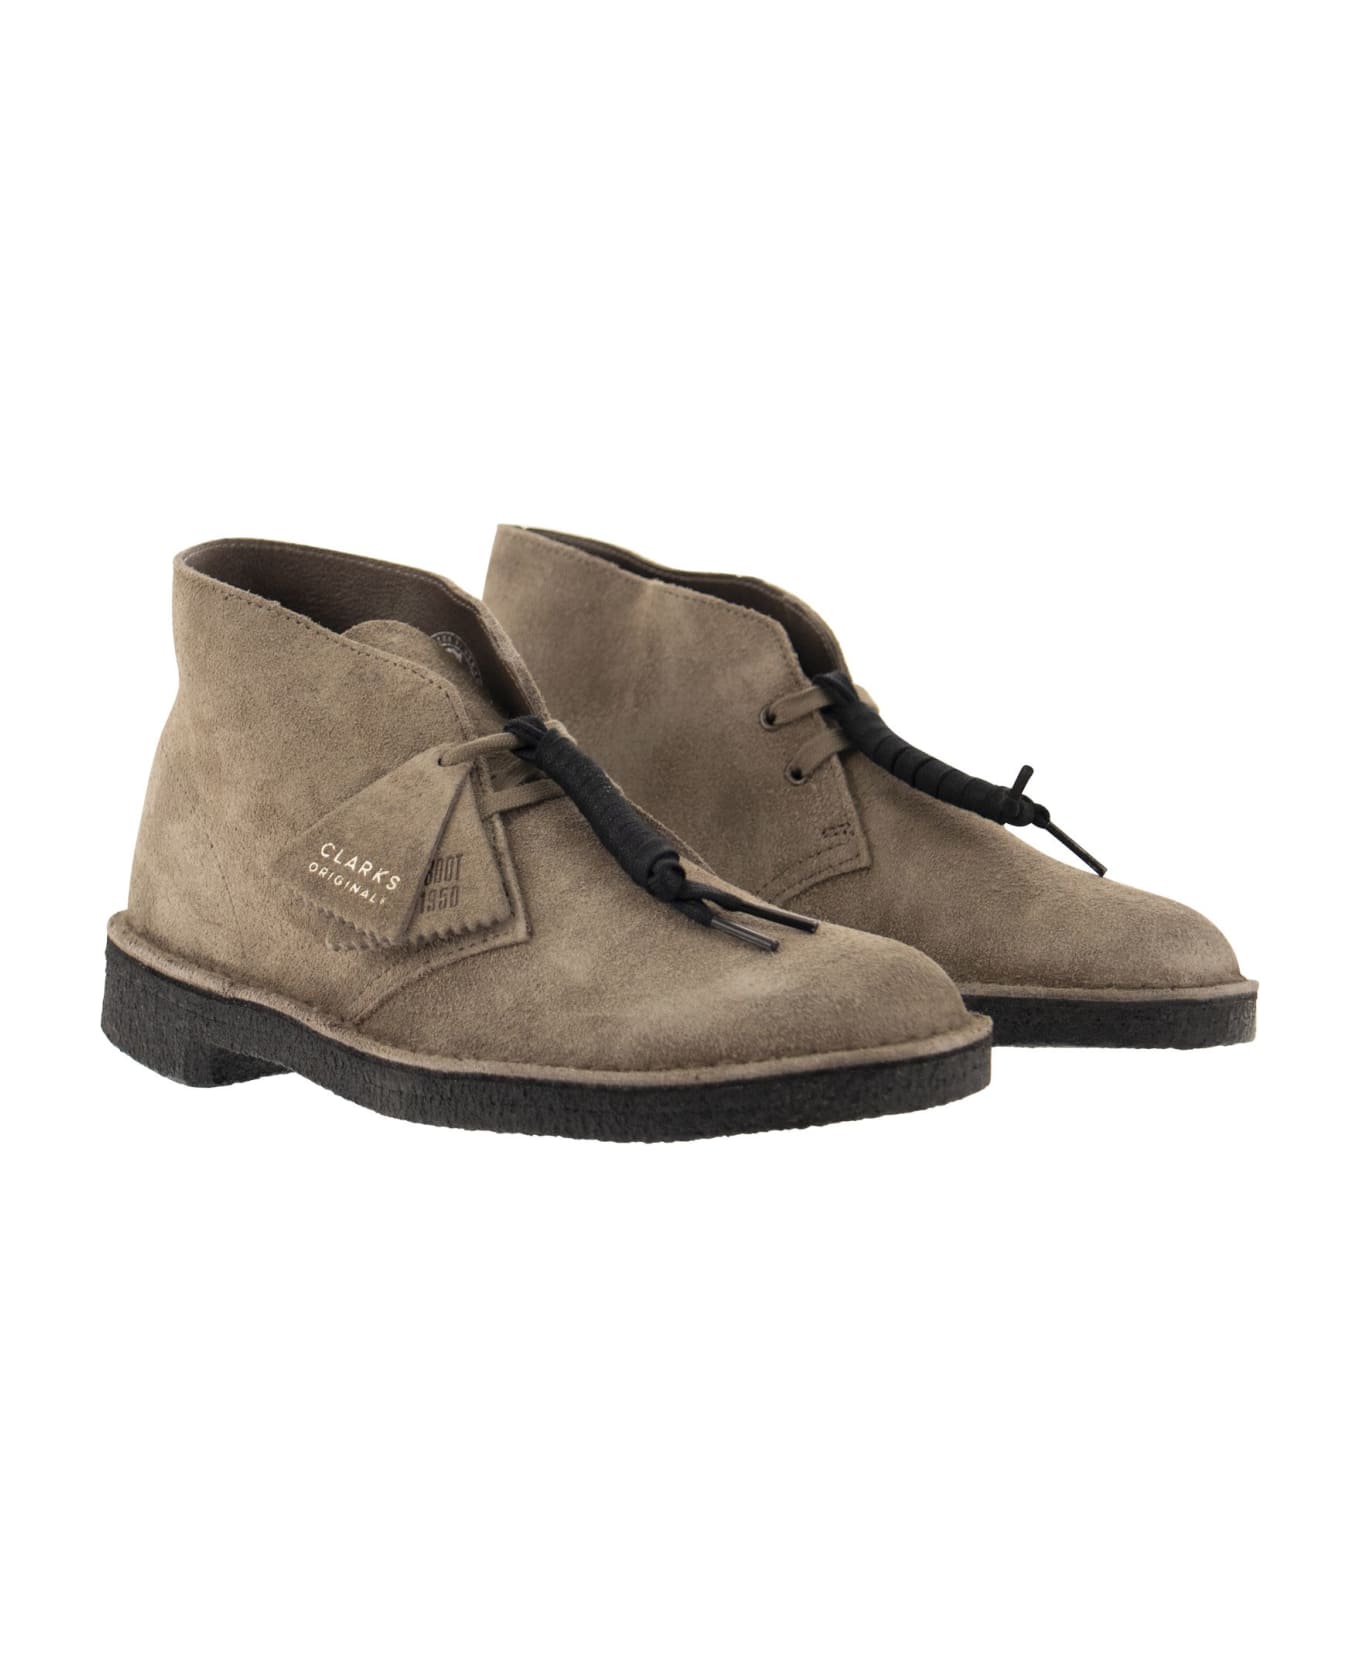 Clarks Desert Boot - Lace-up Boot - Grey